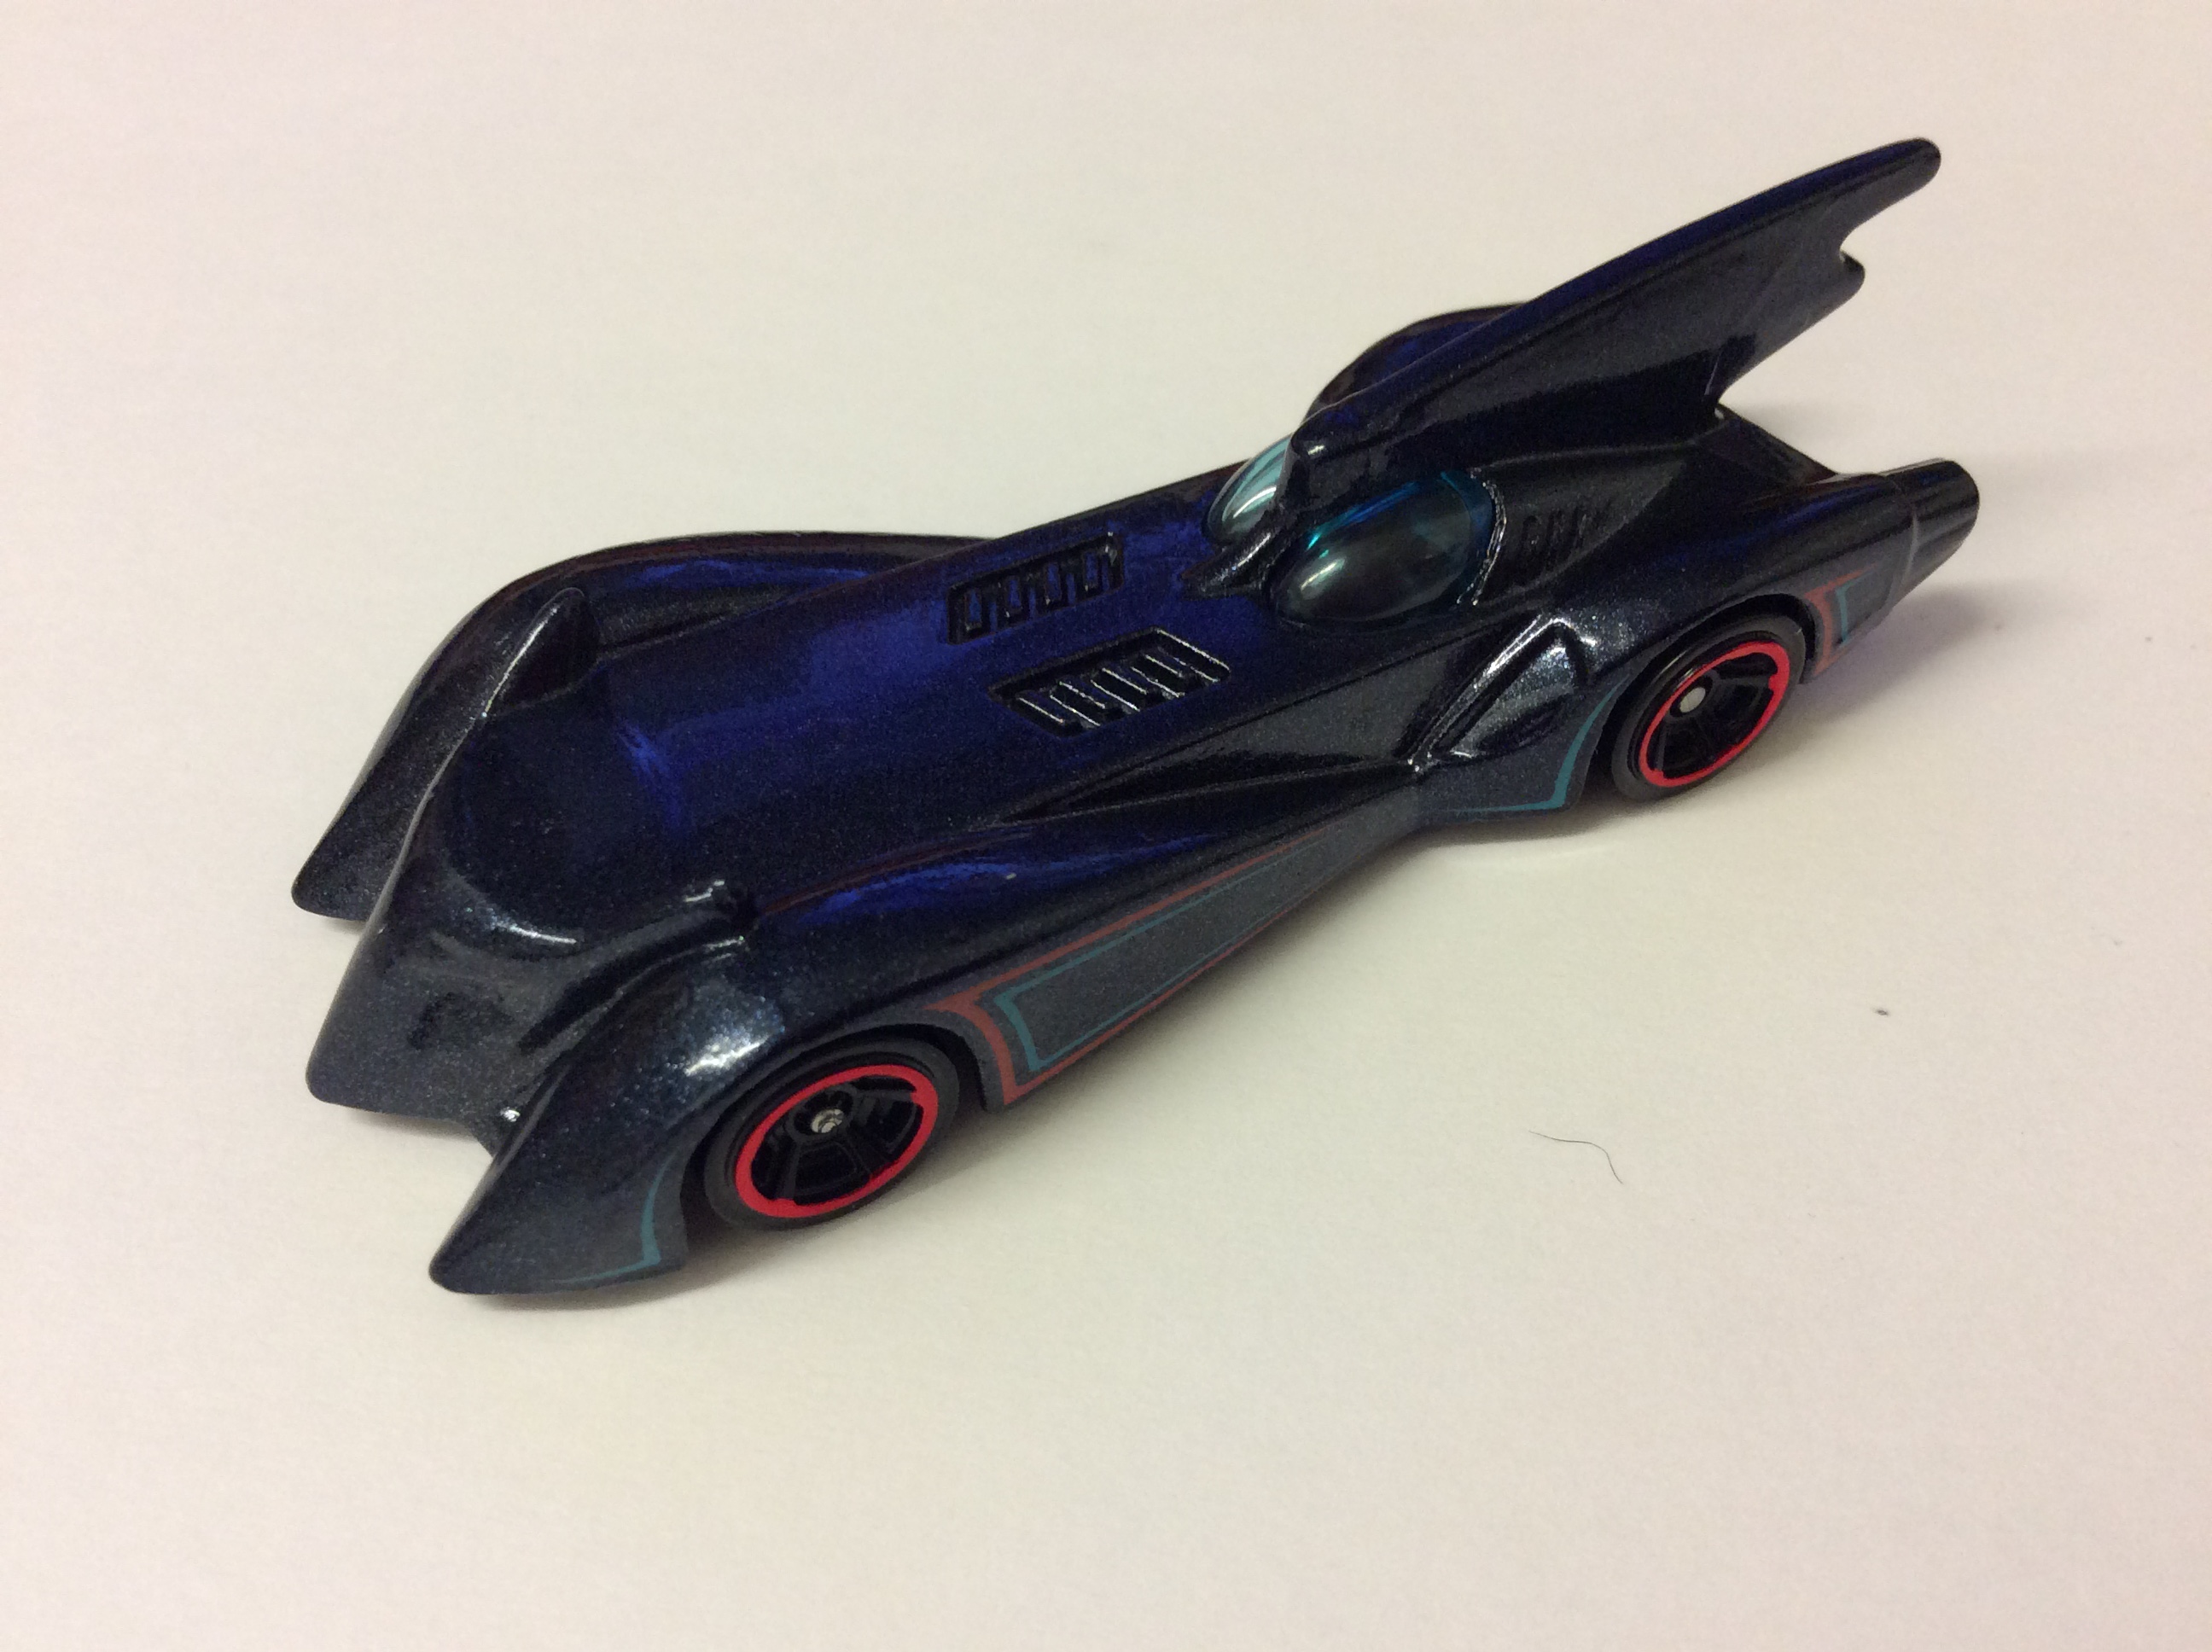 Batmobile (The Brave and the Bold) | Hot Wheels Wiki | Fandom